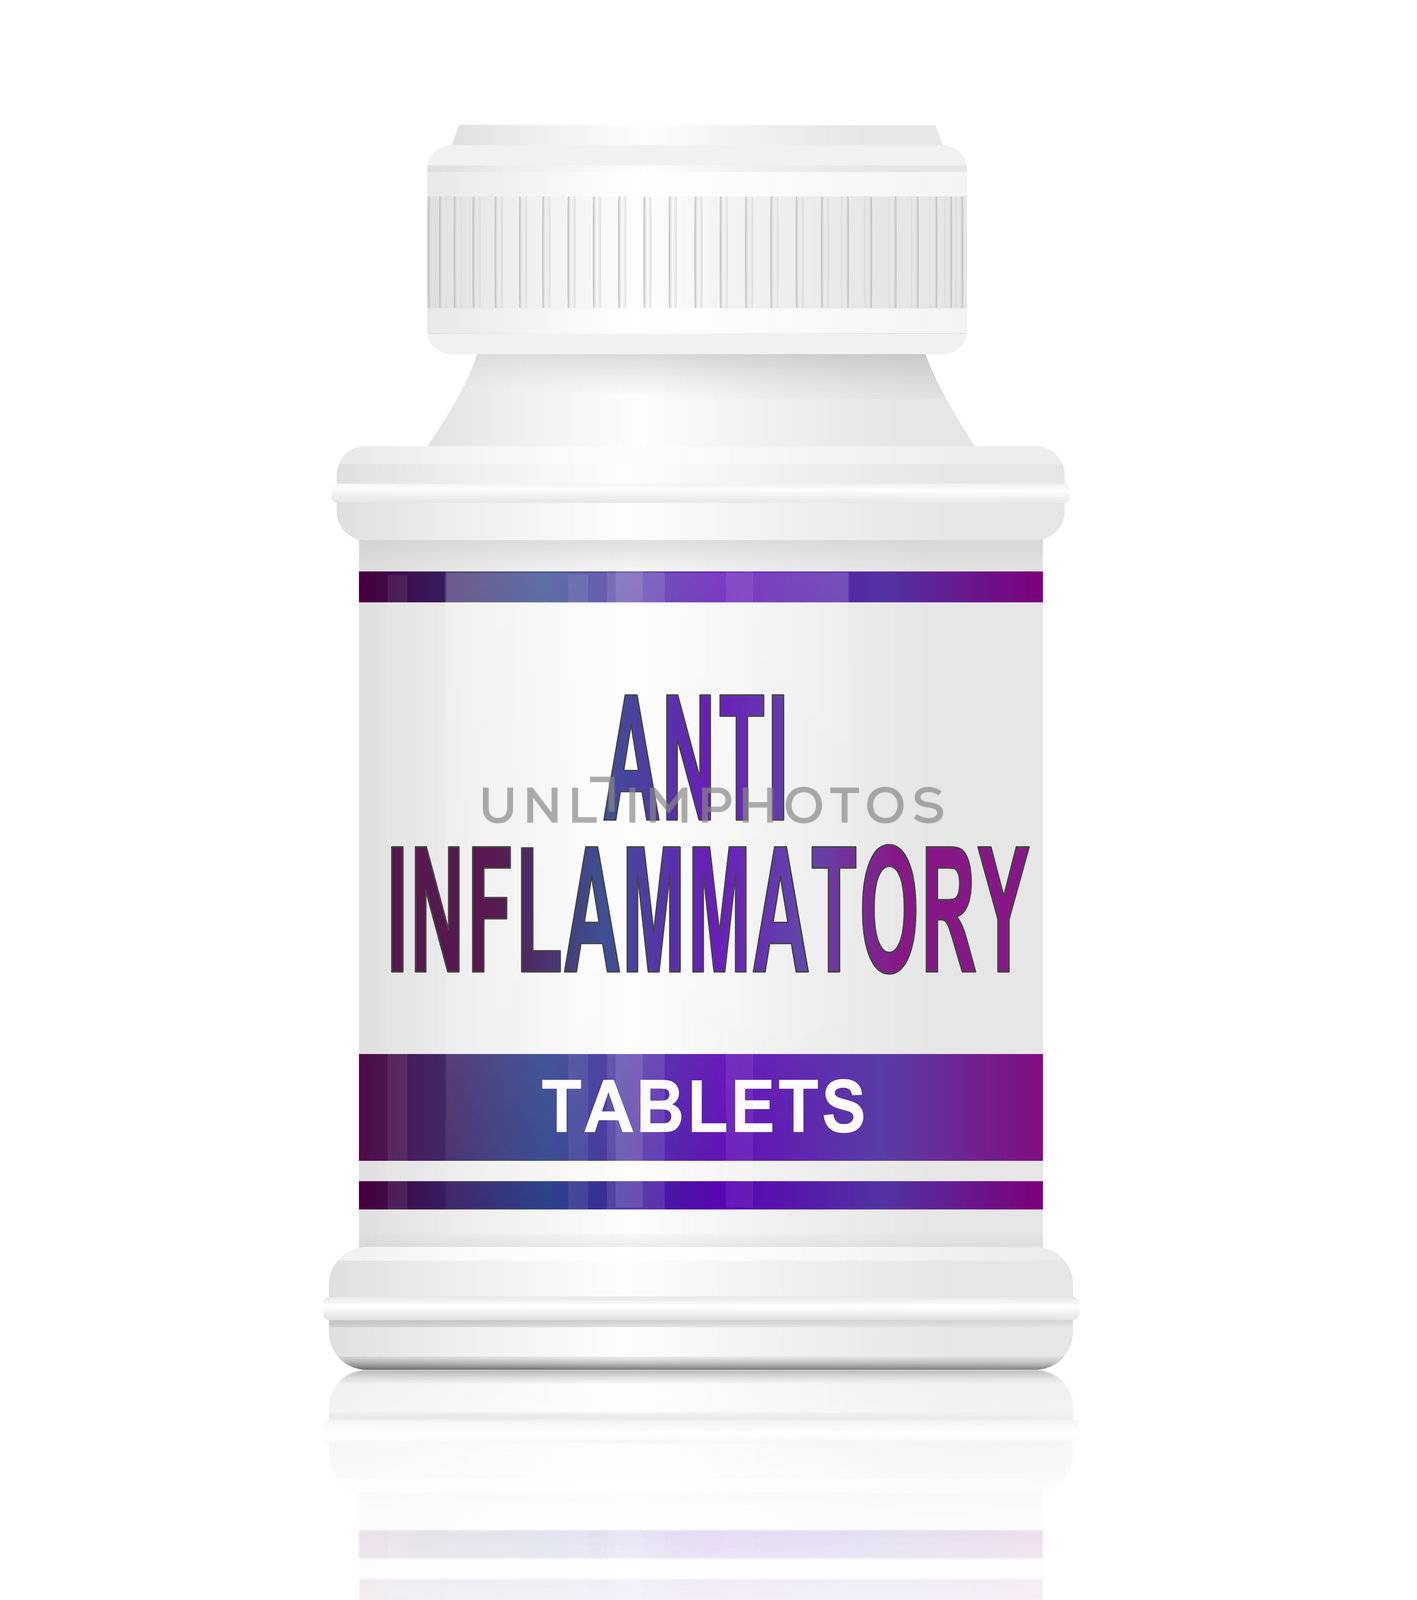 Illustration depicting a single medication container with the words 'anti inflammatory tablets' on the front with white background.